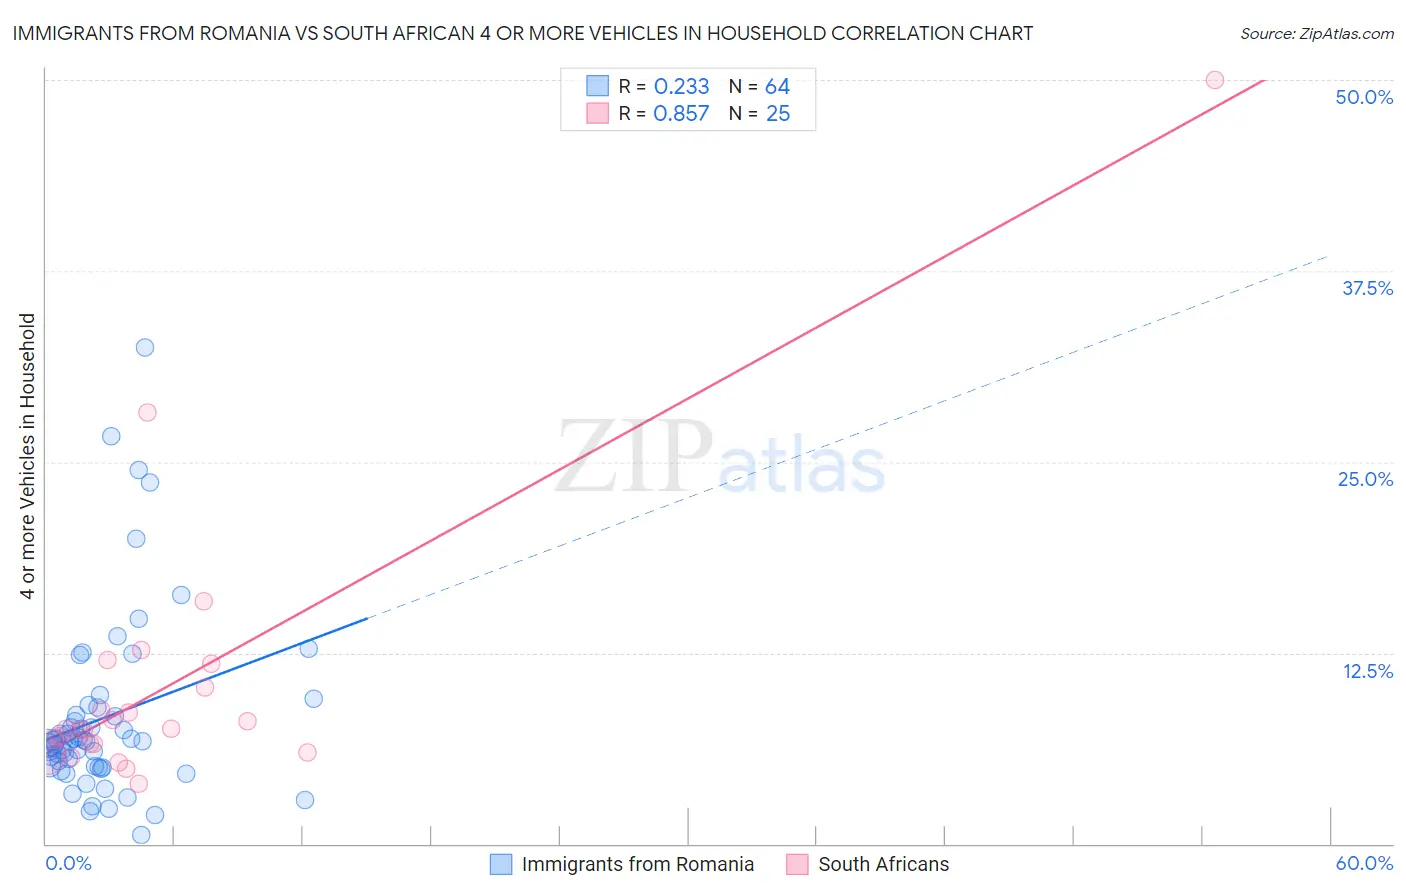 Immigrants from Romania vs South African 4 or more Vehicles in Household